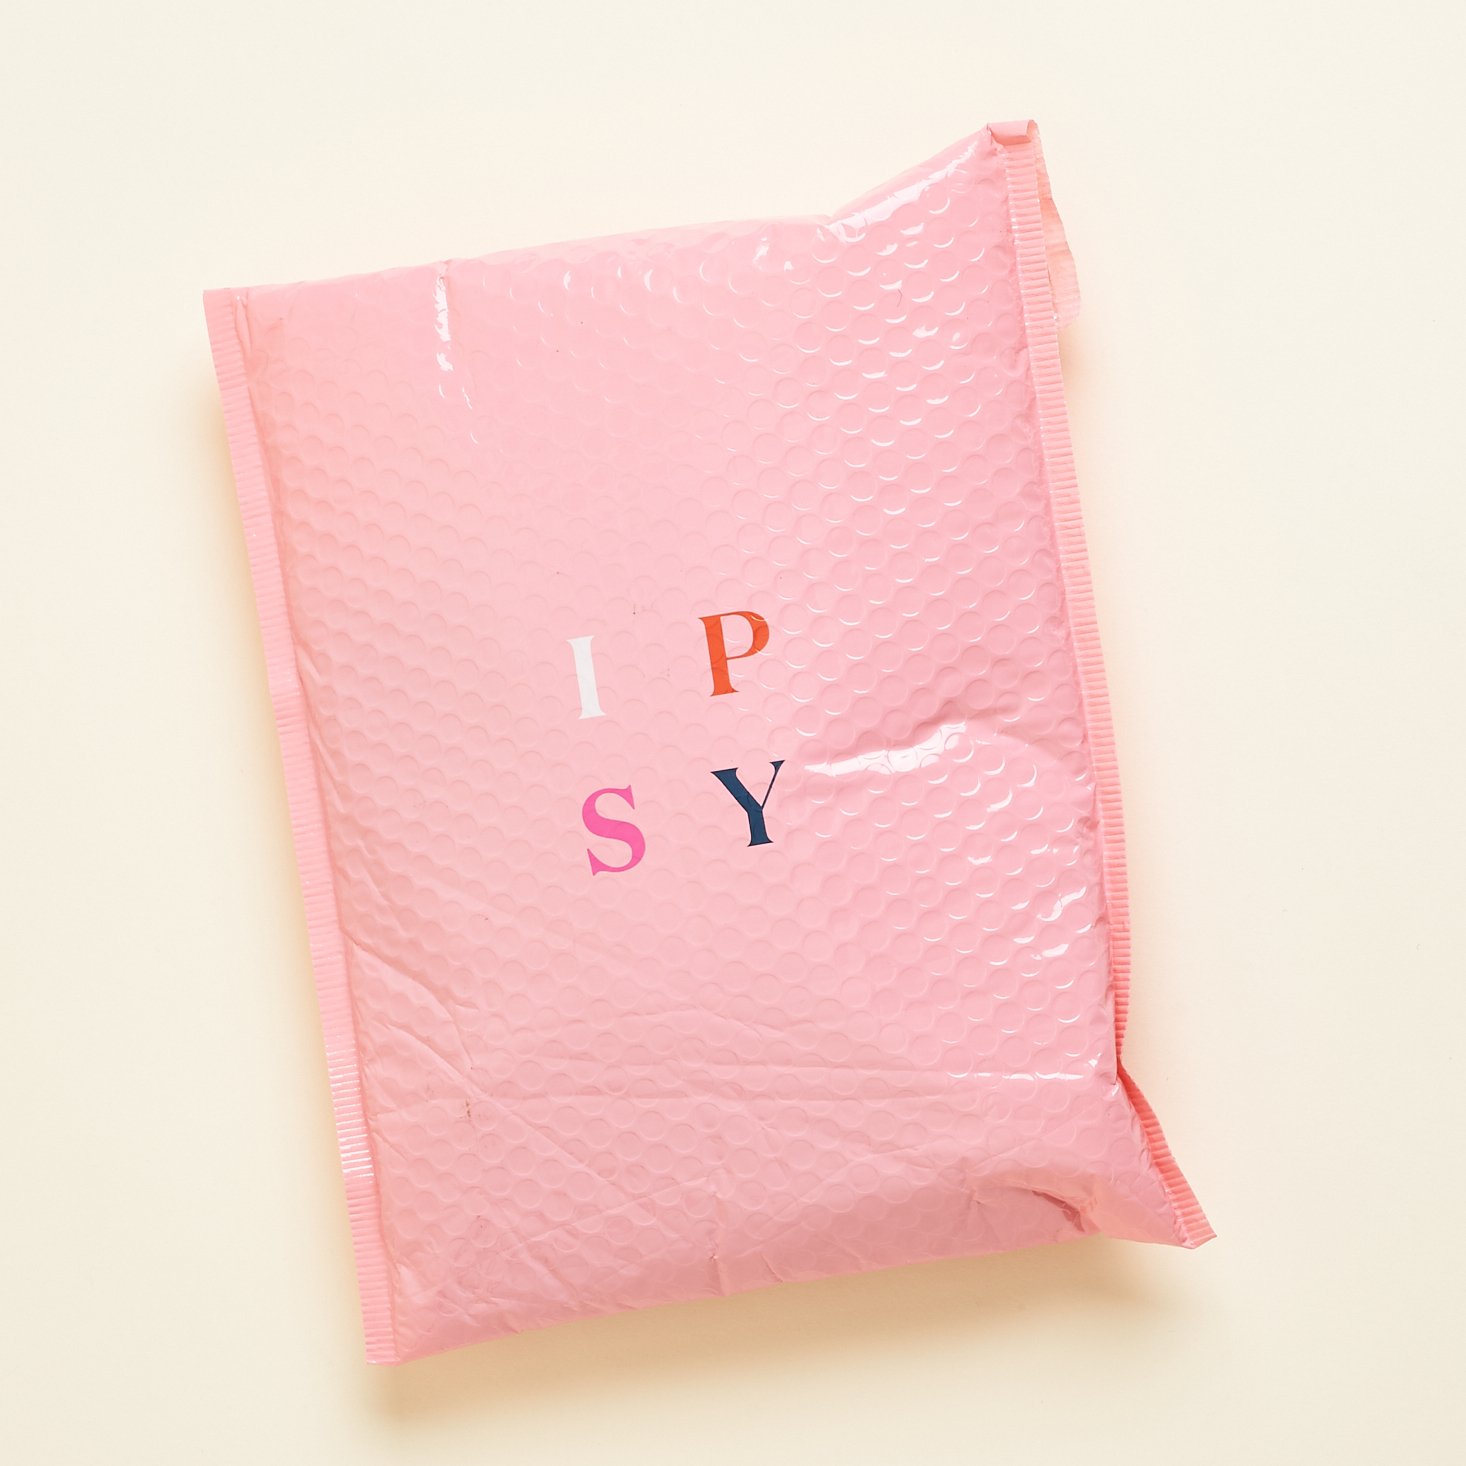 IPSY Glam Bag Plus Review – August 2020